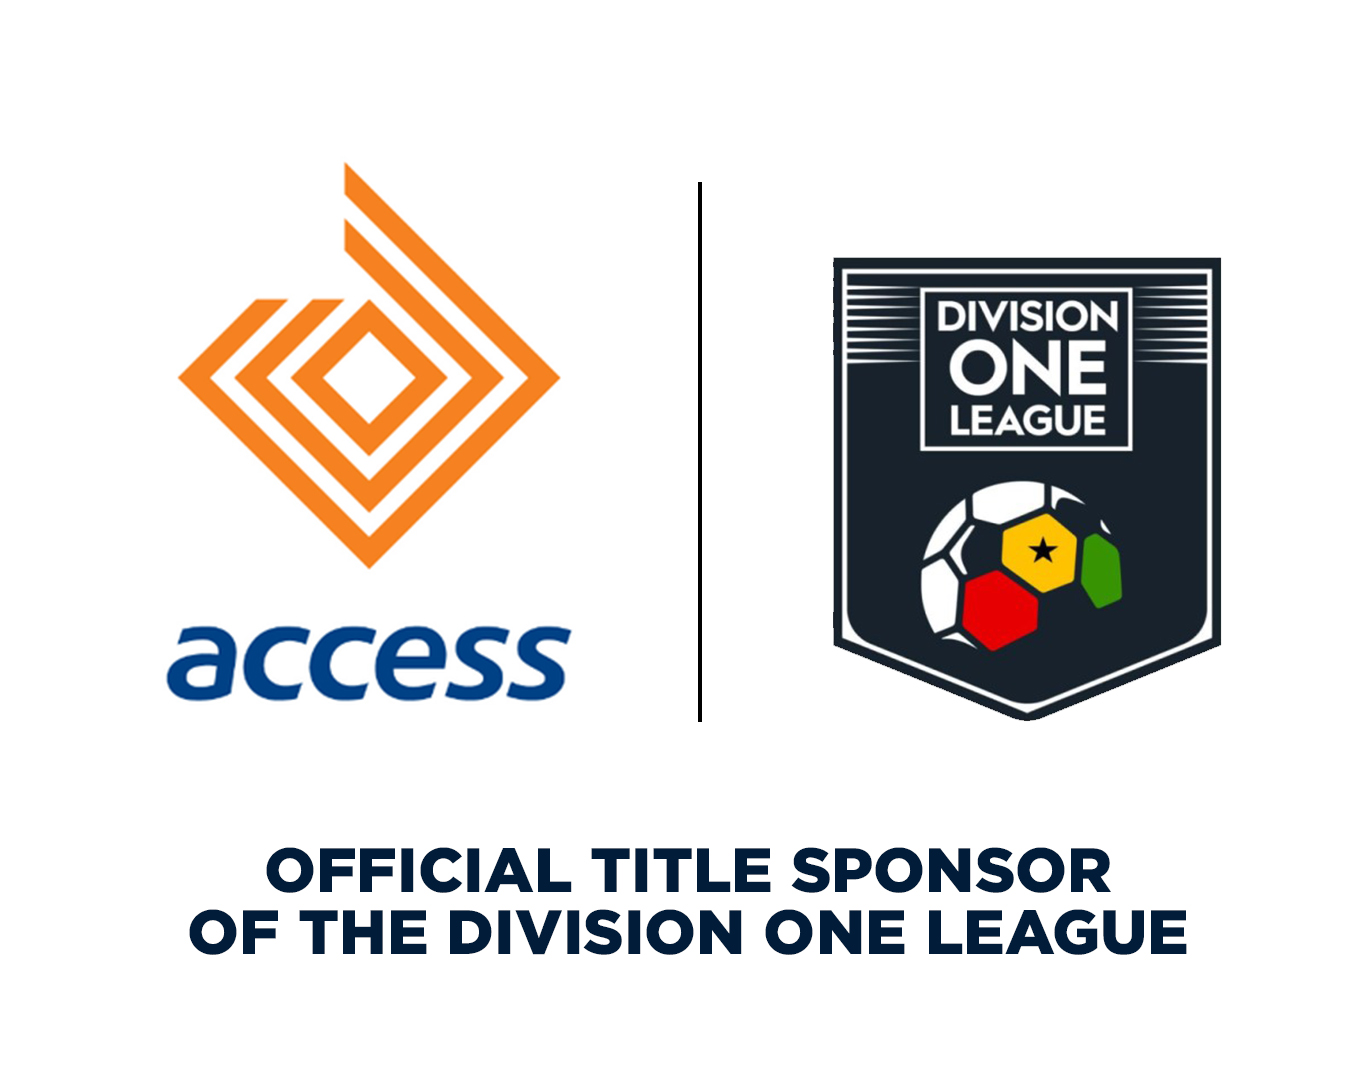 GFA and Access Bank extend sponsorship for three more seasons